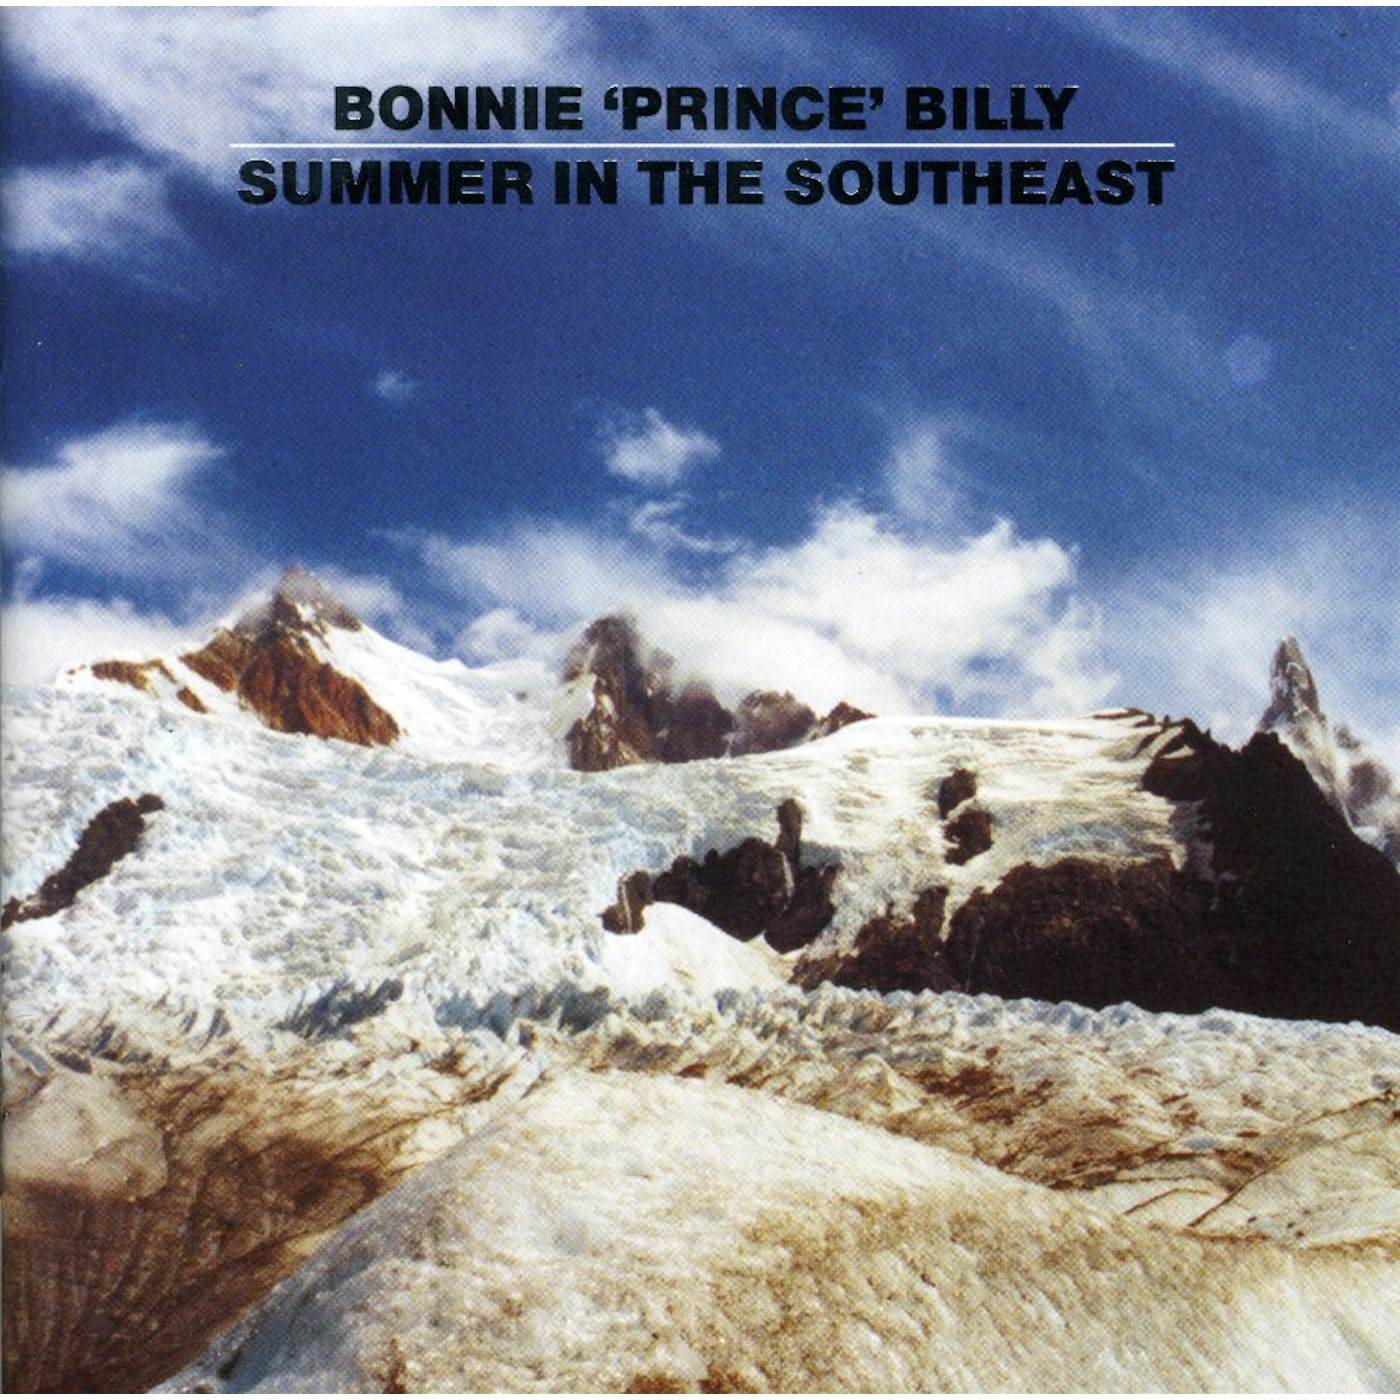 Bonnie Prince Billy SUMMER IN THE SOUTHEAST CD